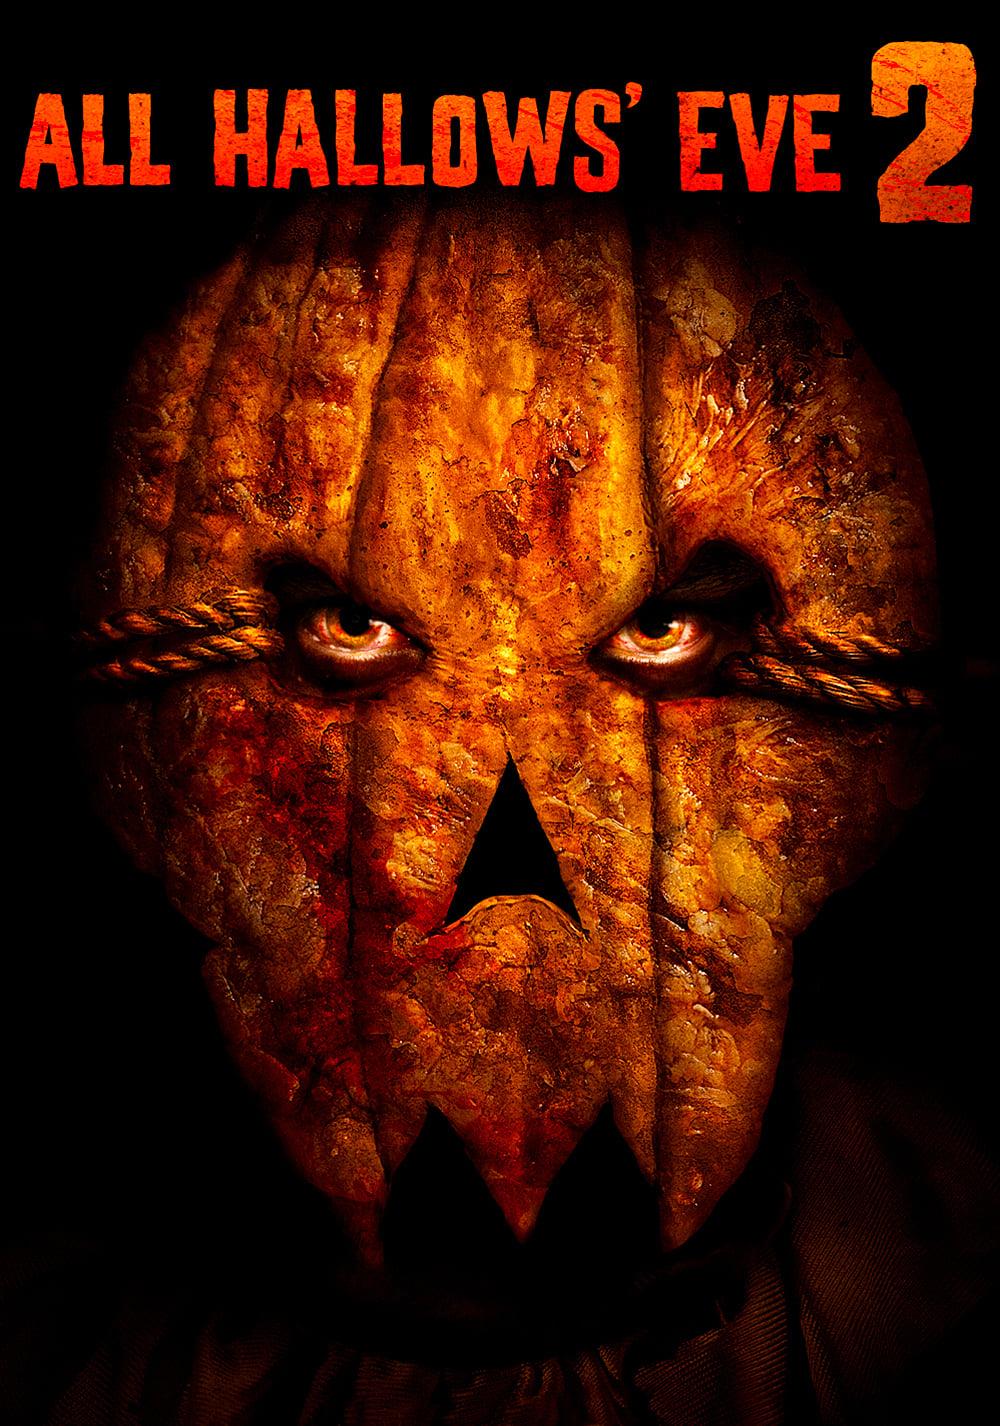 All Hallows' Eve 2 poster